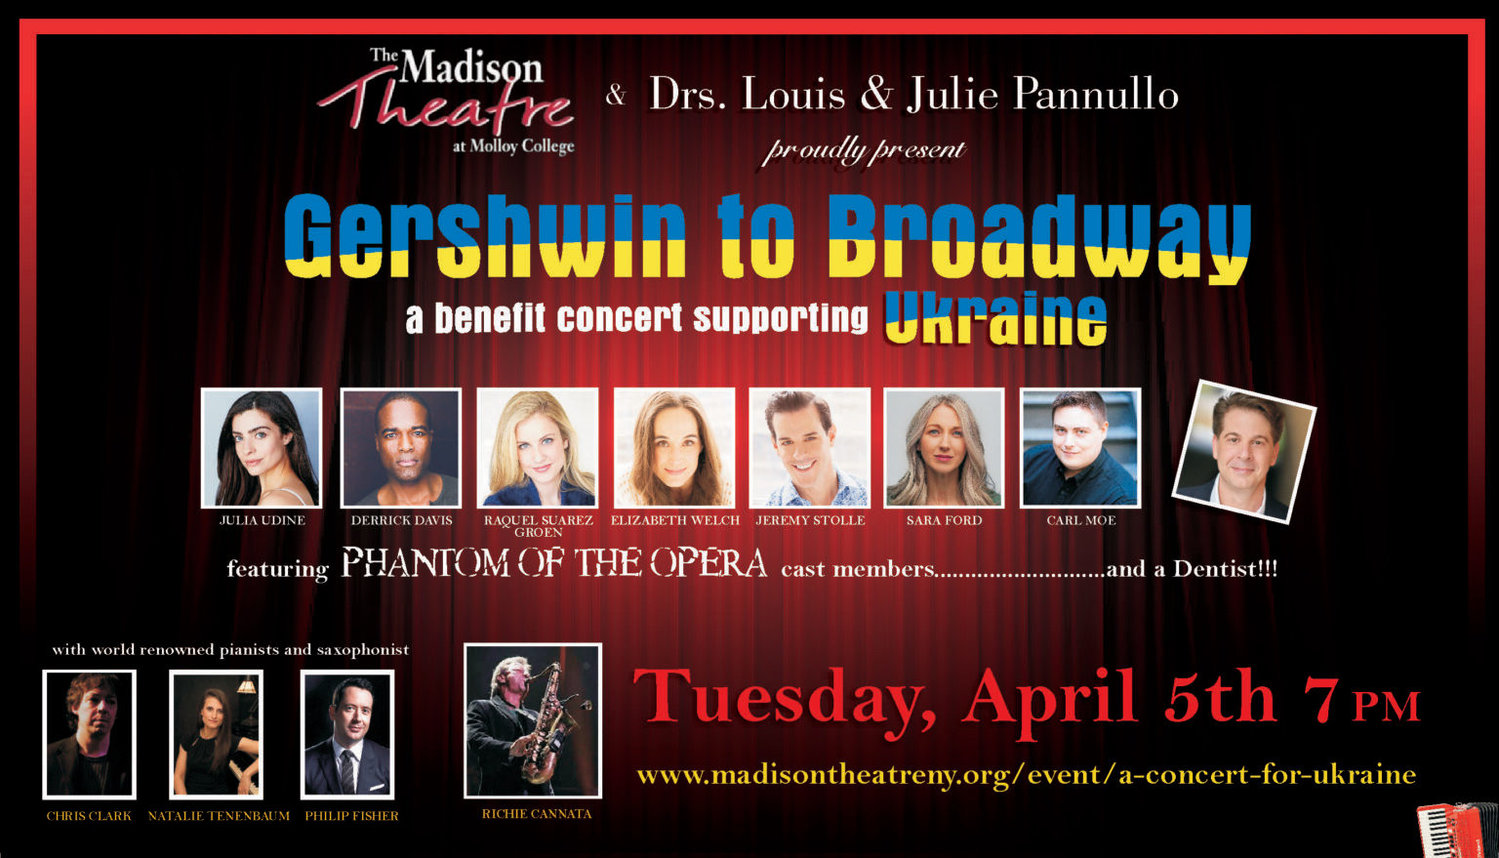 the event will feature Broadway performers and Molloy College students.